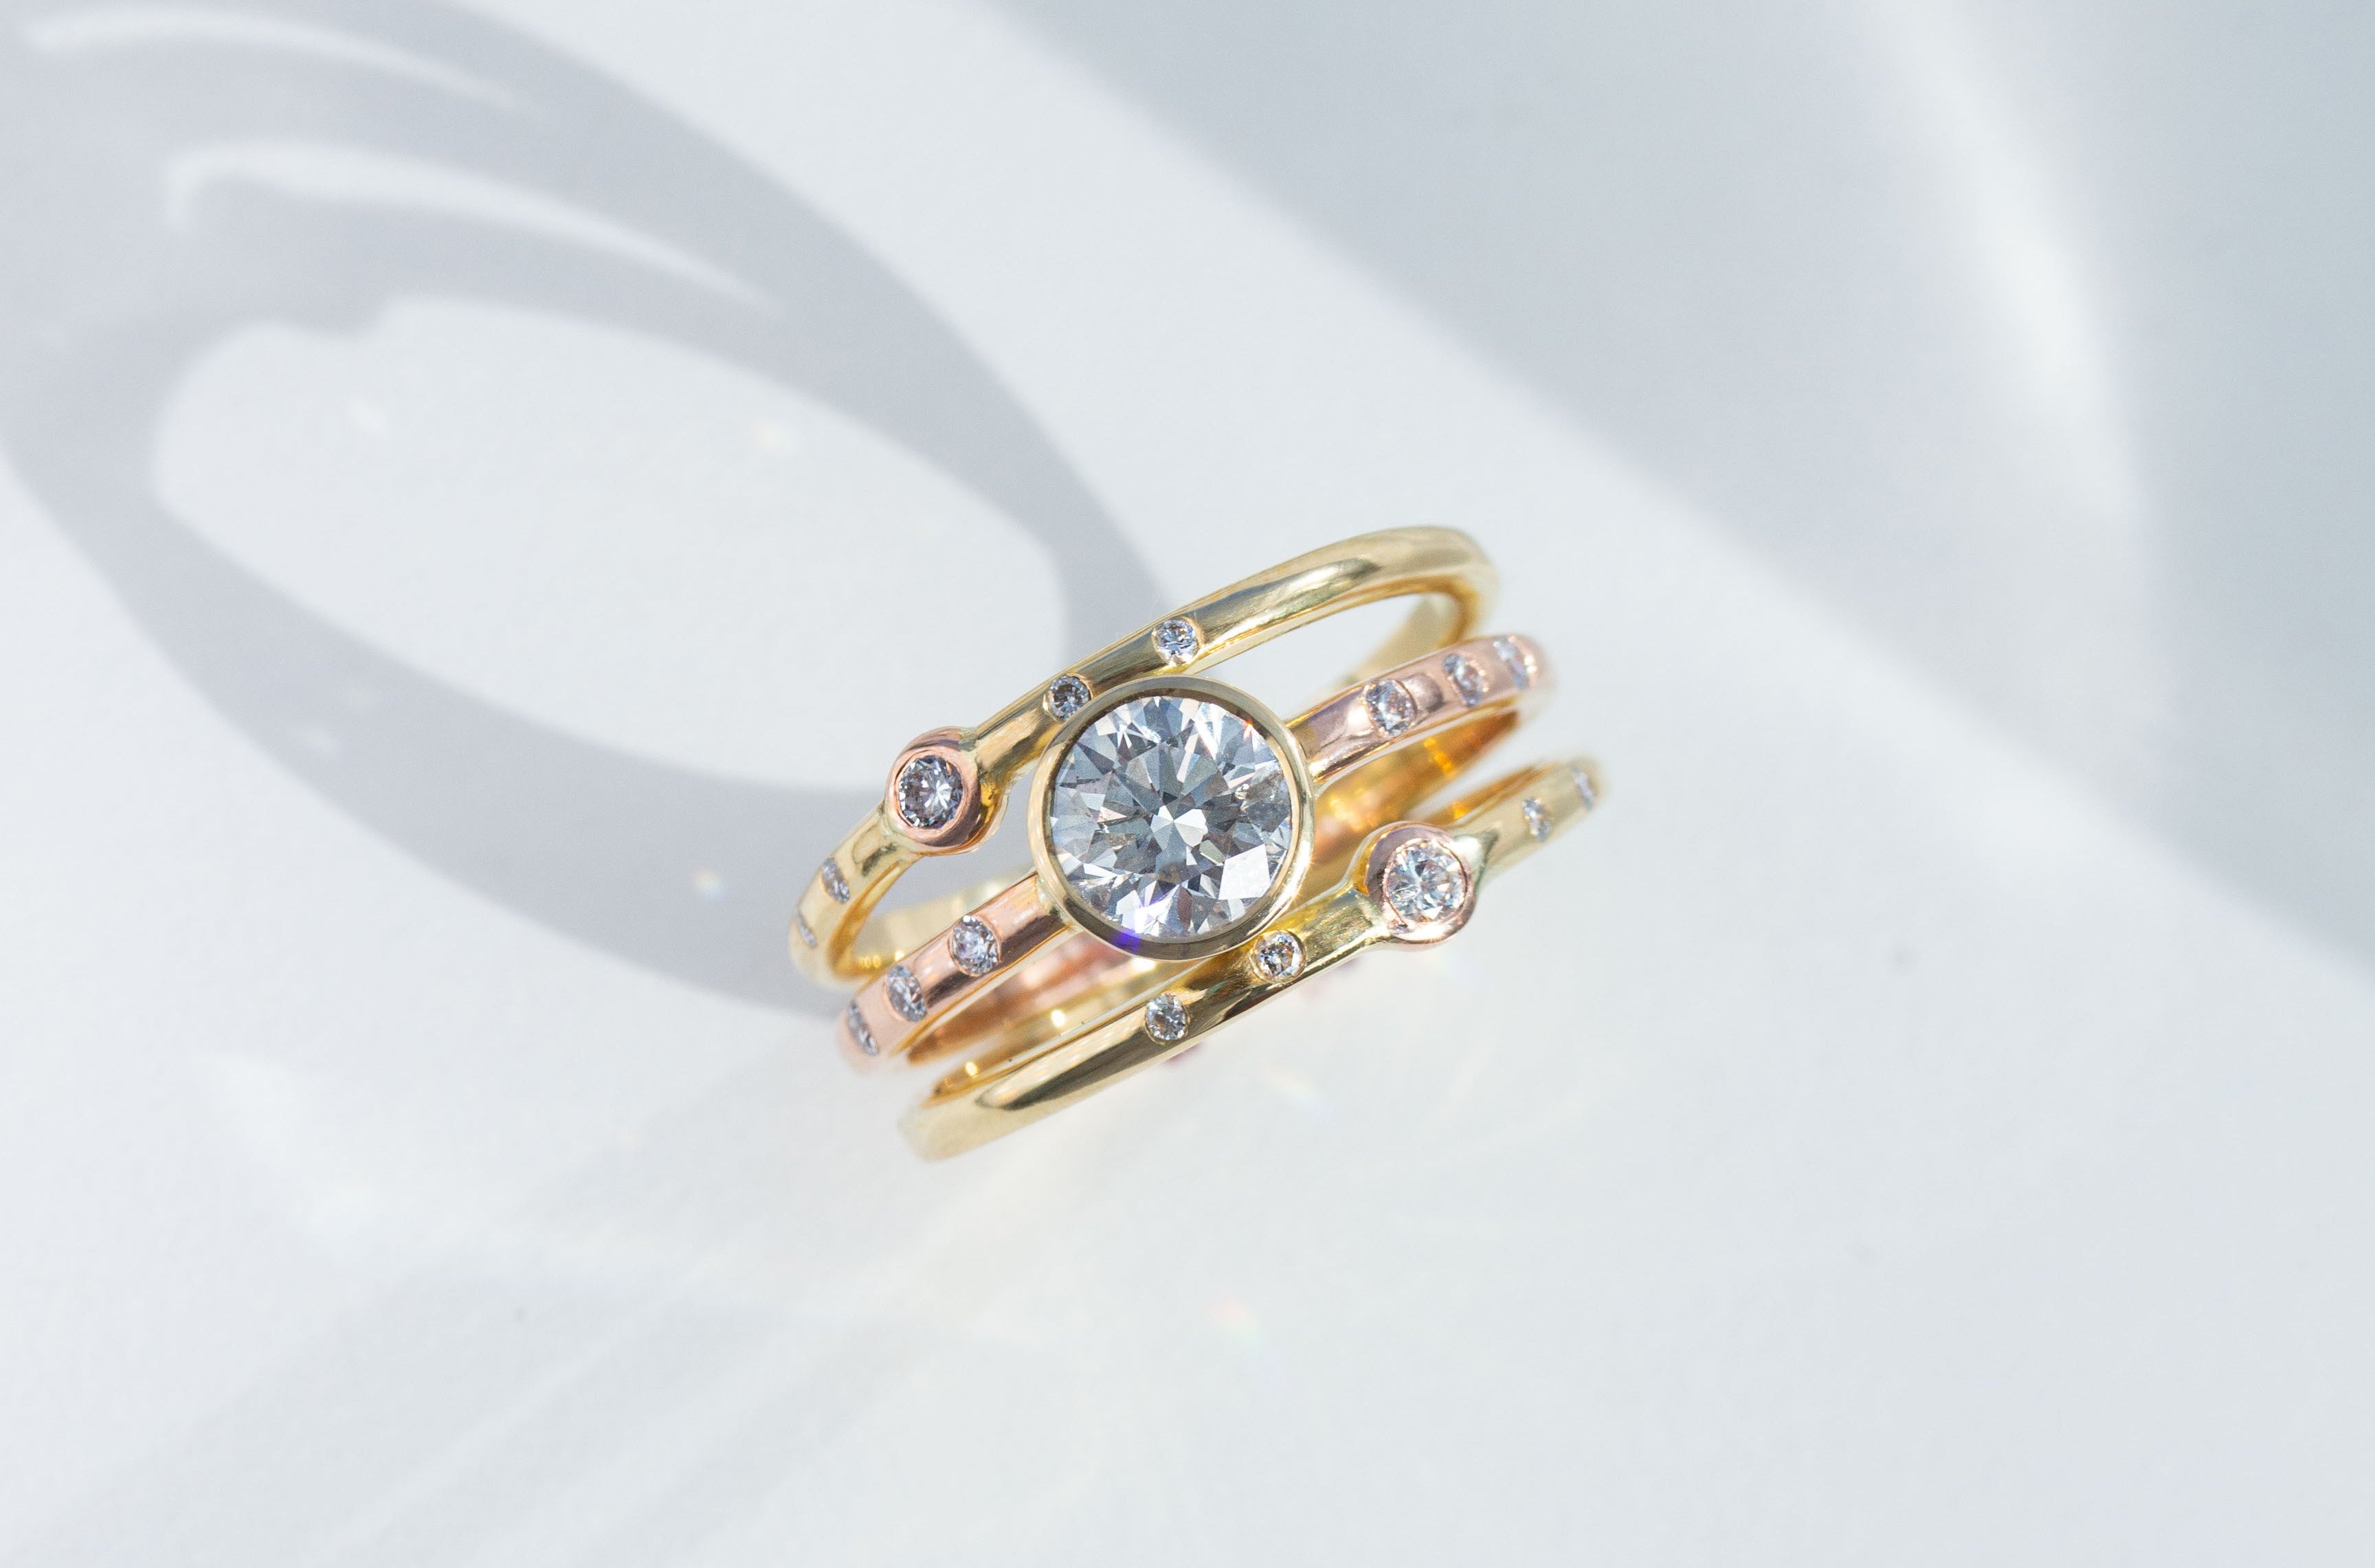 Triple Ring Design in 18K Yellow and Rose Gold and 1ct Diamond Ring Remodel on white background